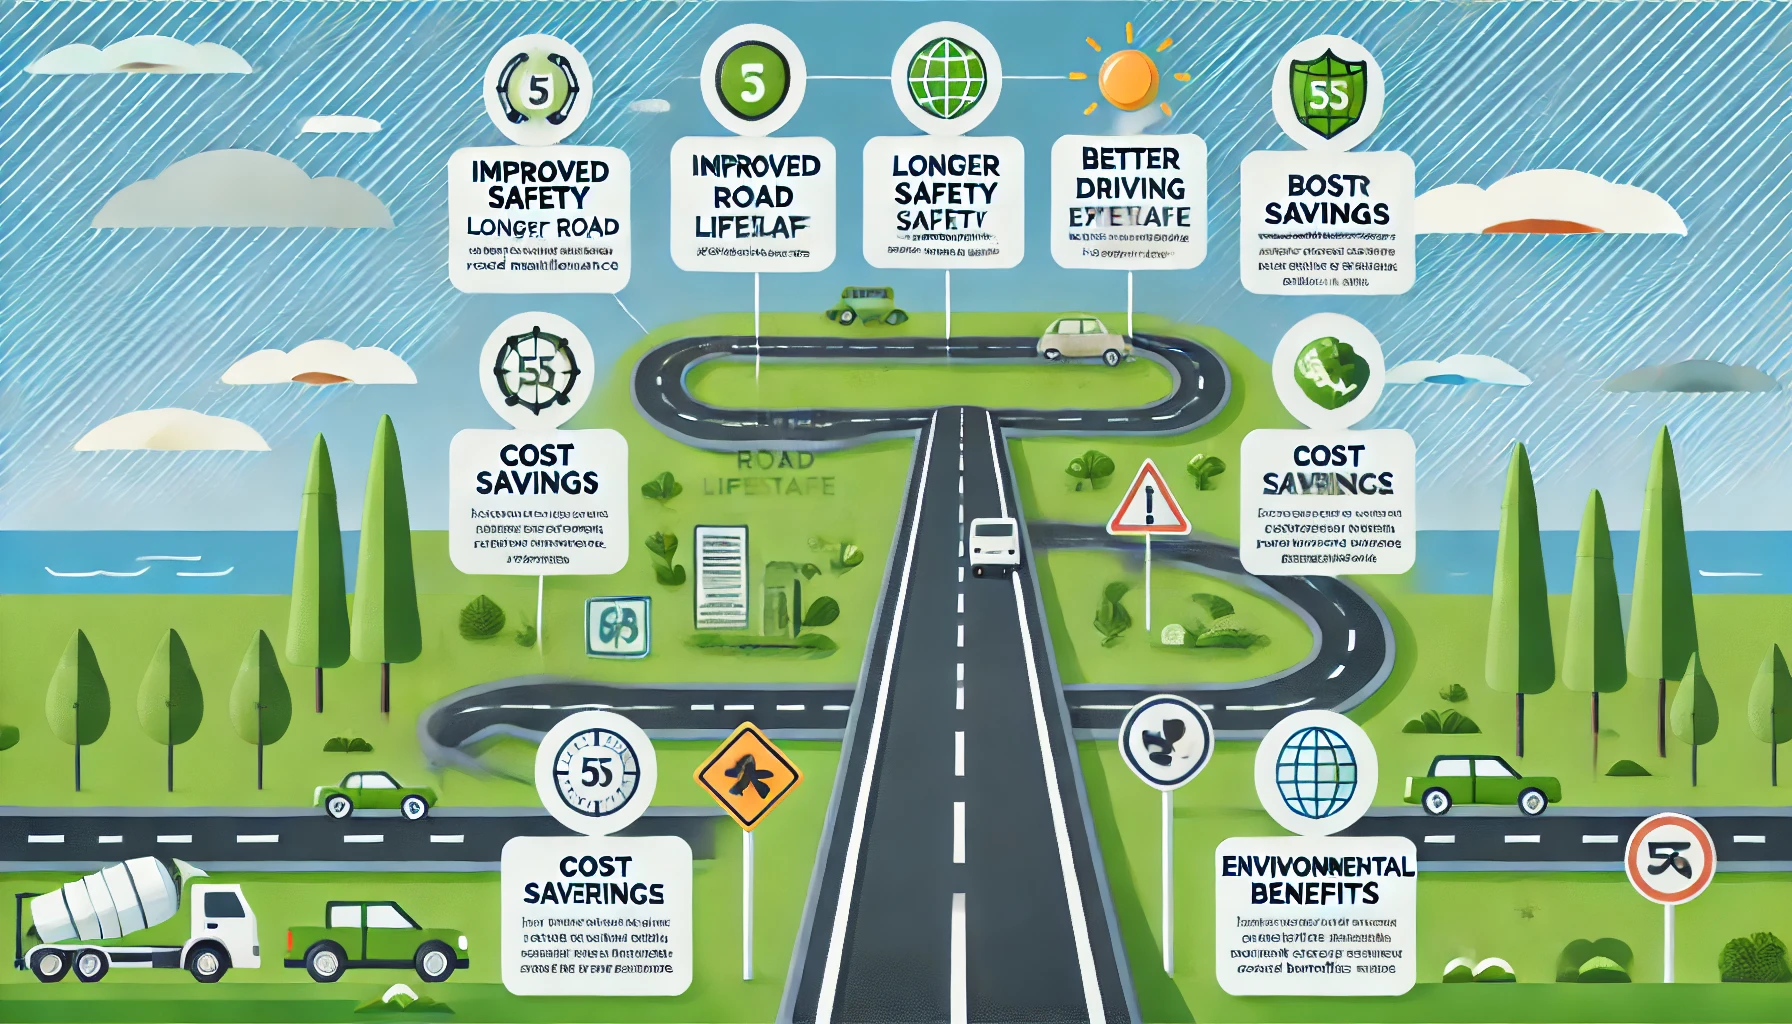 "Infographic illustrating the benefits of regular road maintenance, featuring icons and labels for improved safety, longer road lifespan, cost savings, better driving experience, and environmental benefits, set against a background of a well-maintained road with green landscapes and clear blue skies."